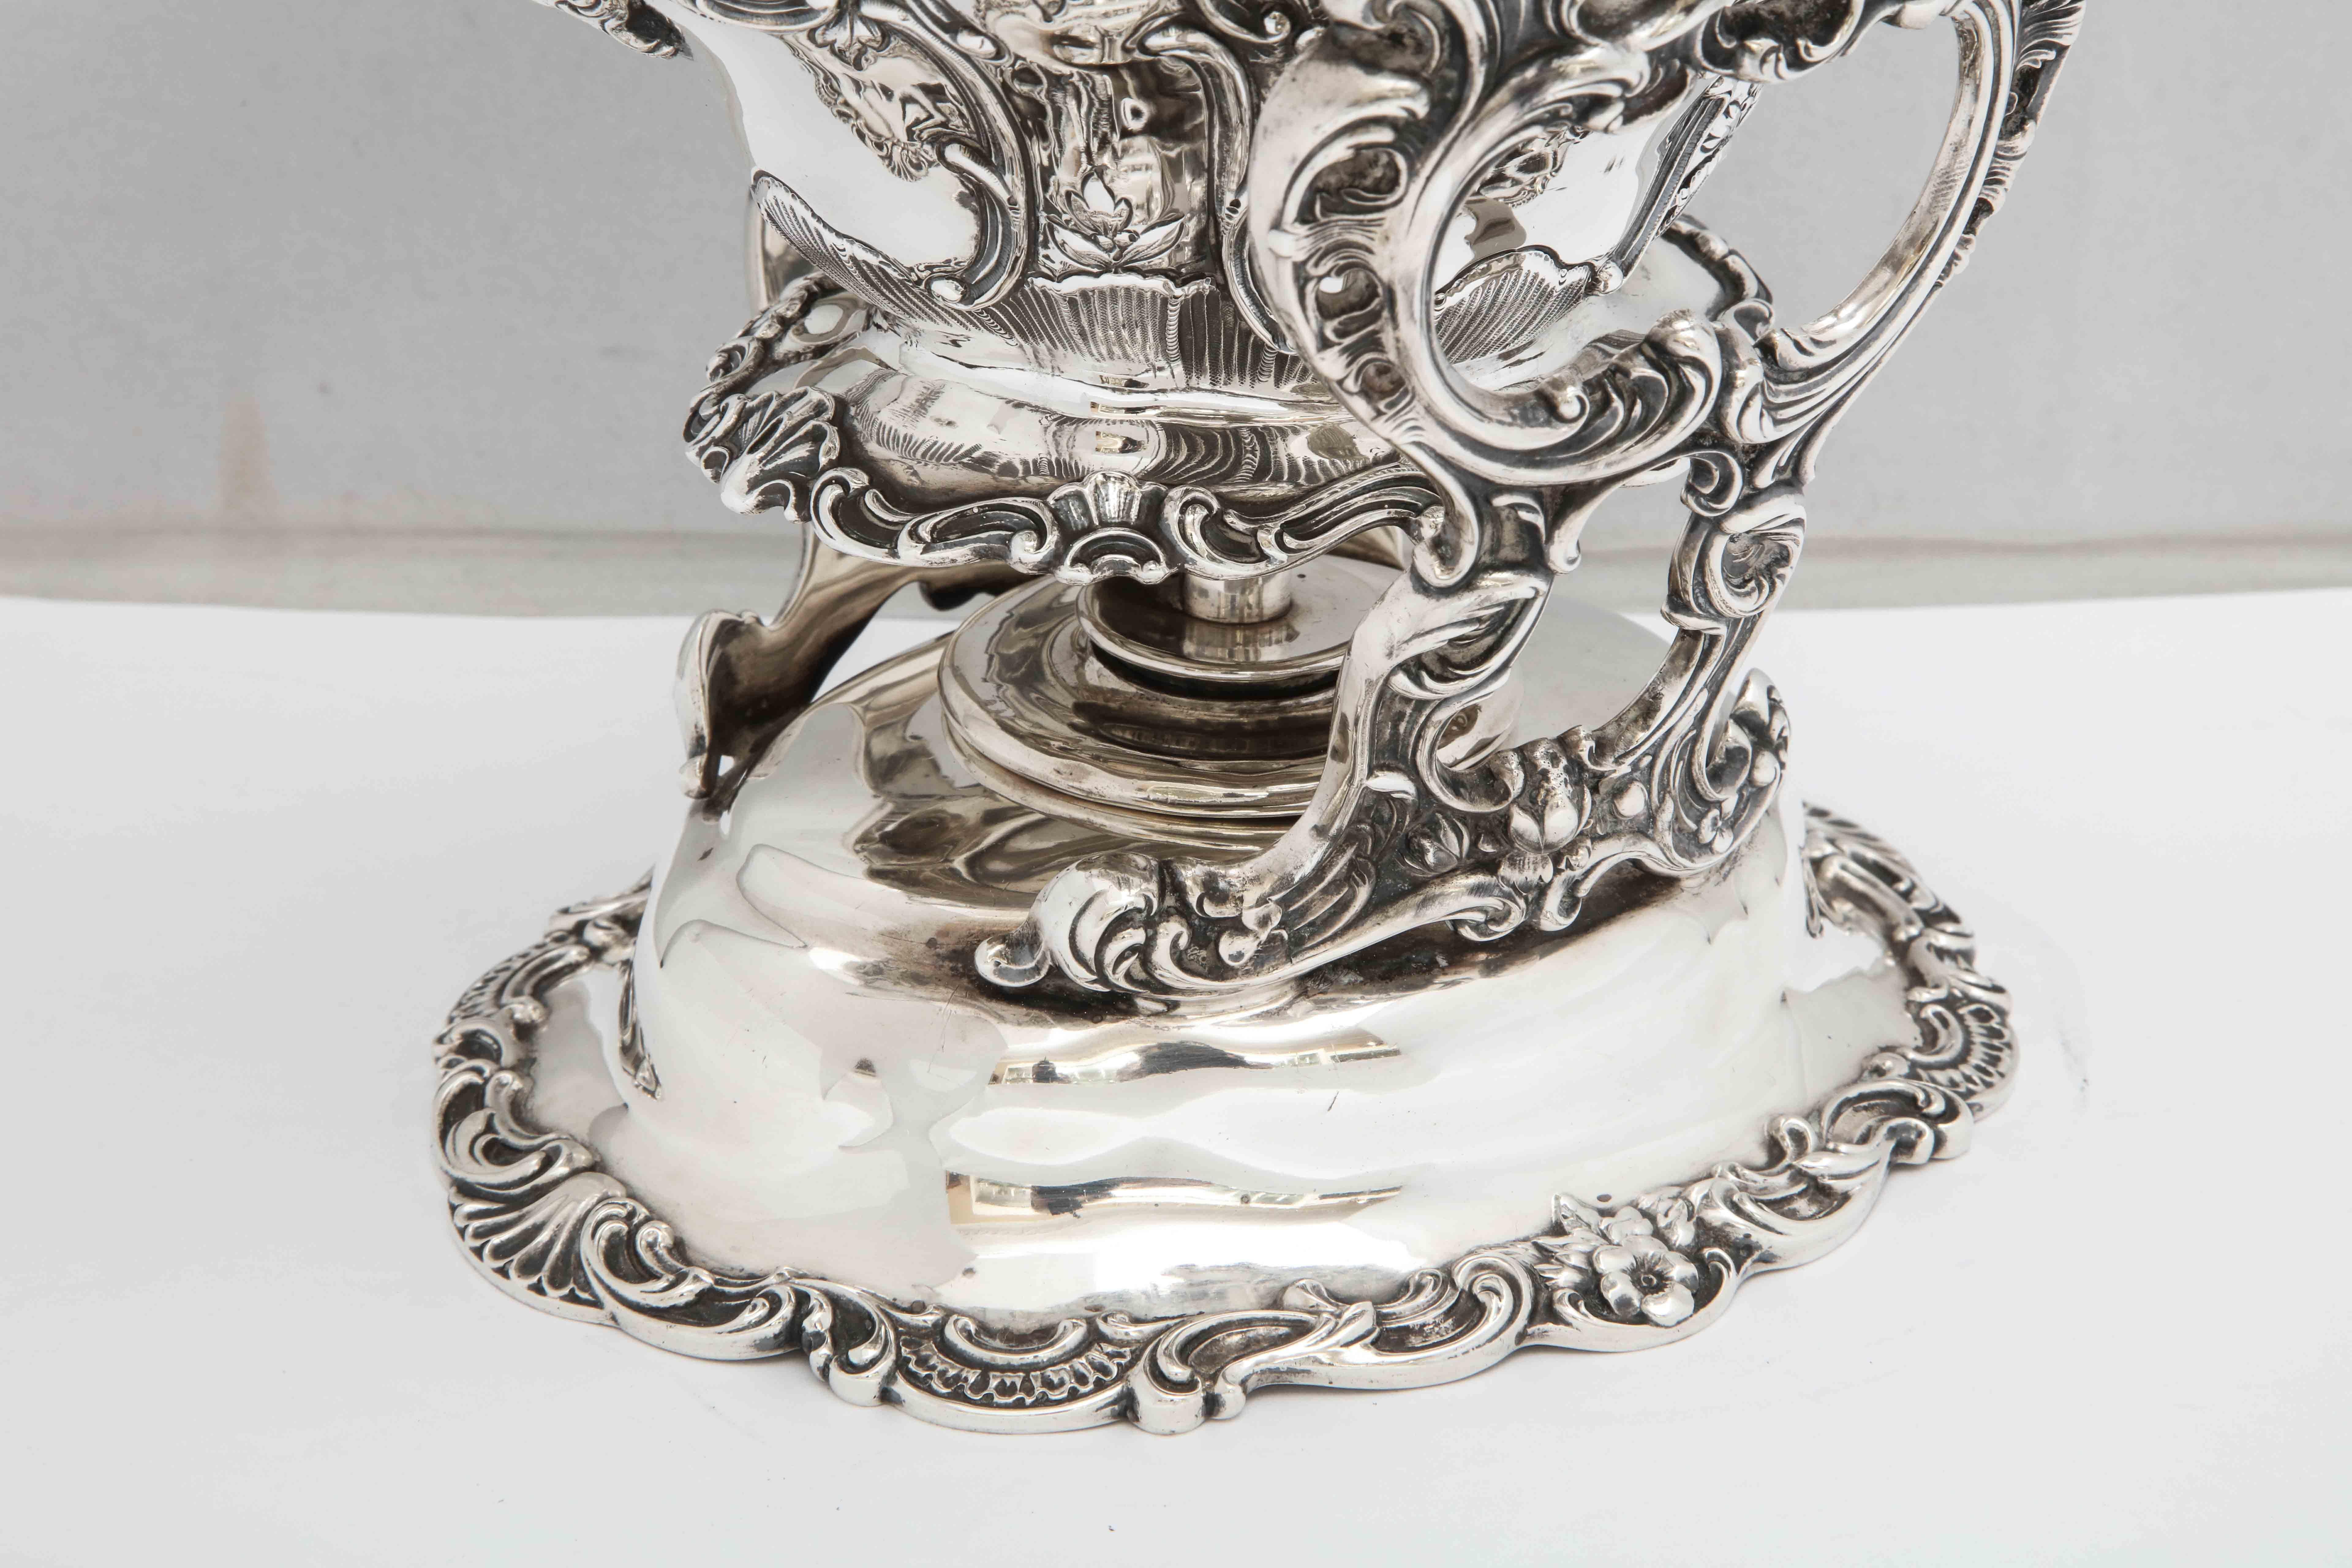 Victorian-Style Sterling Silver Tea Kettle on Stand by Gorham 2